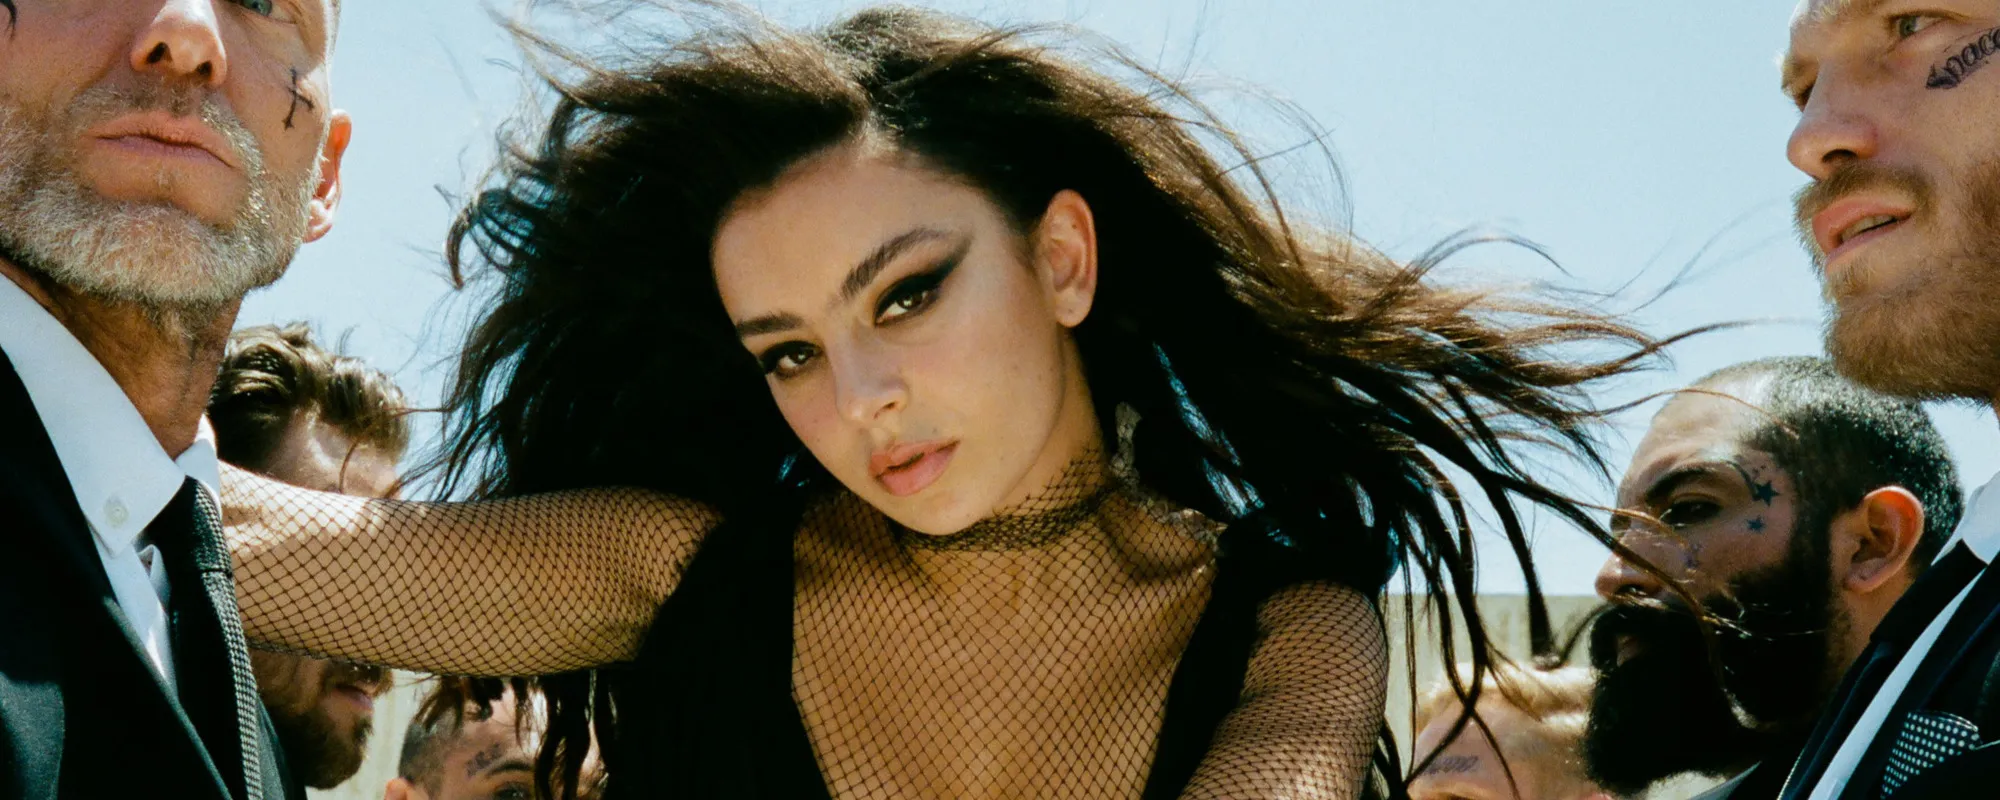 The Provocative Charli XCX Releases New Song, Video “Good Ones”